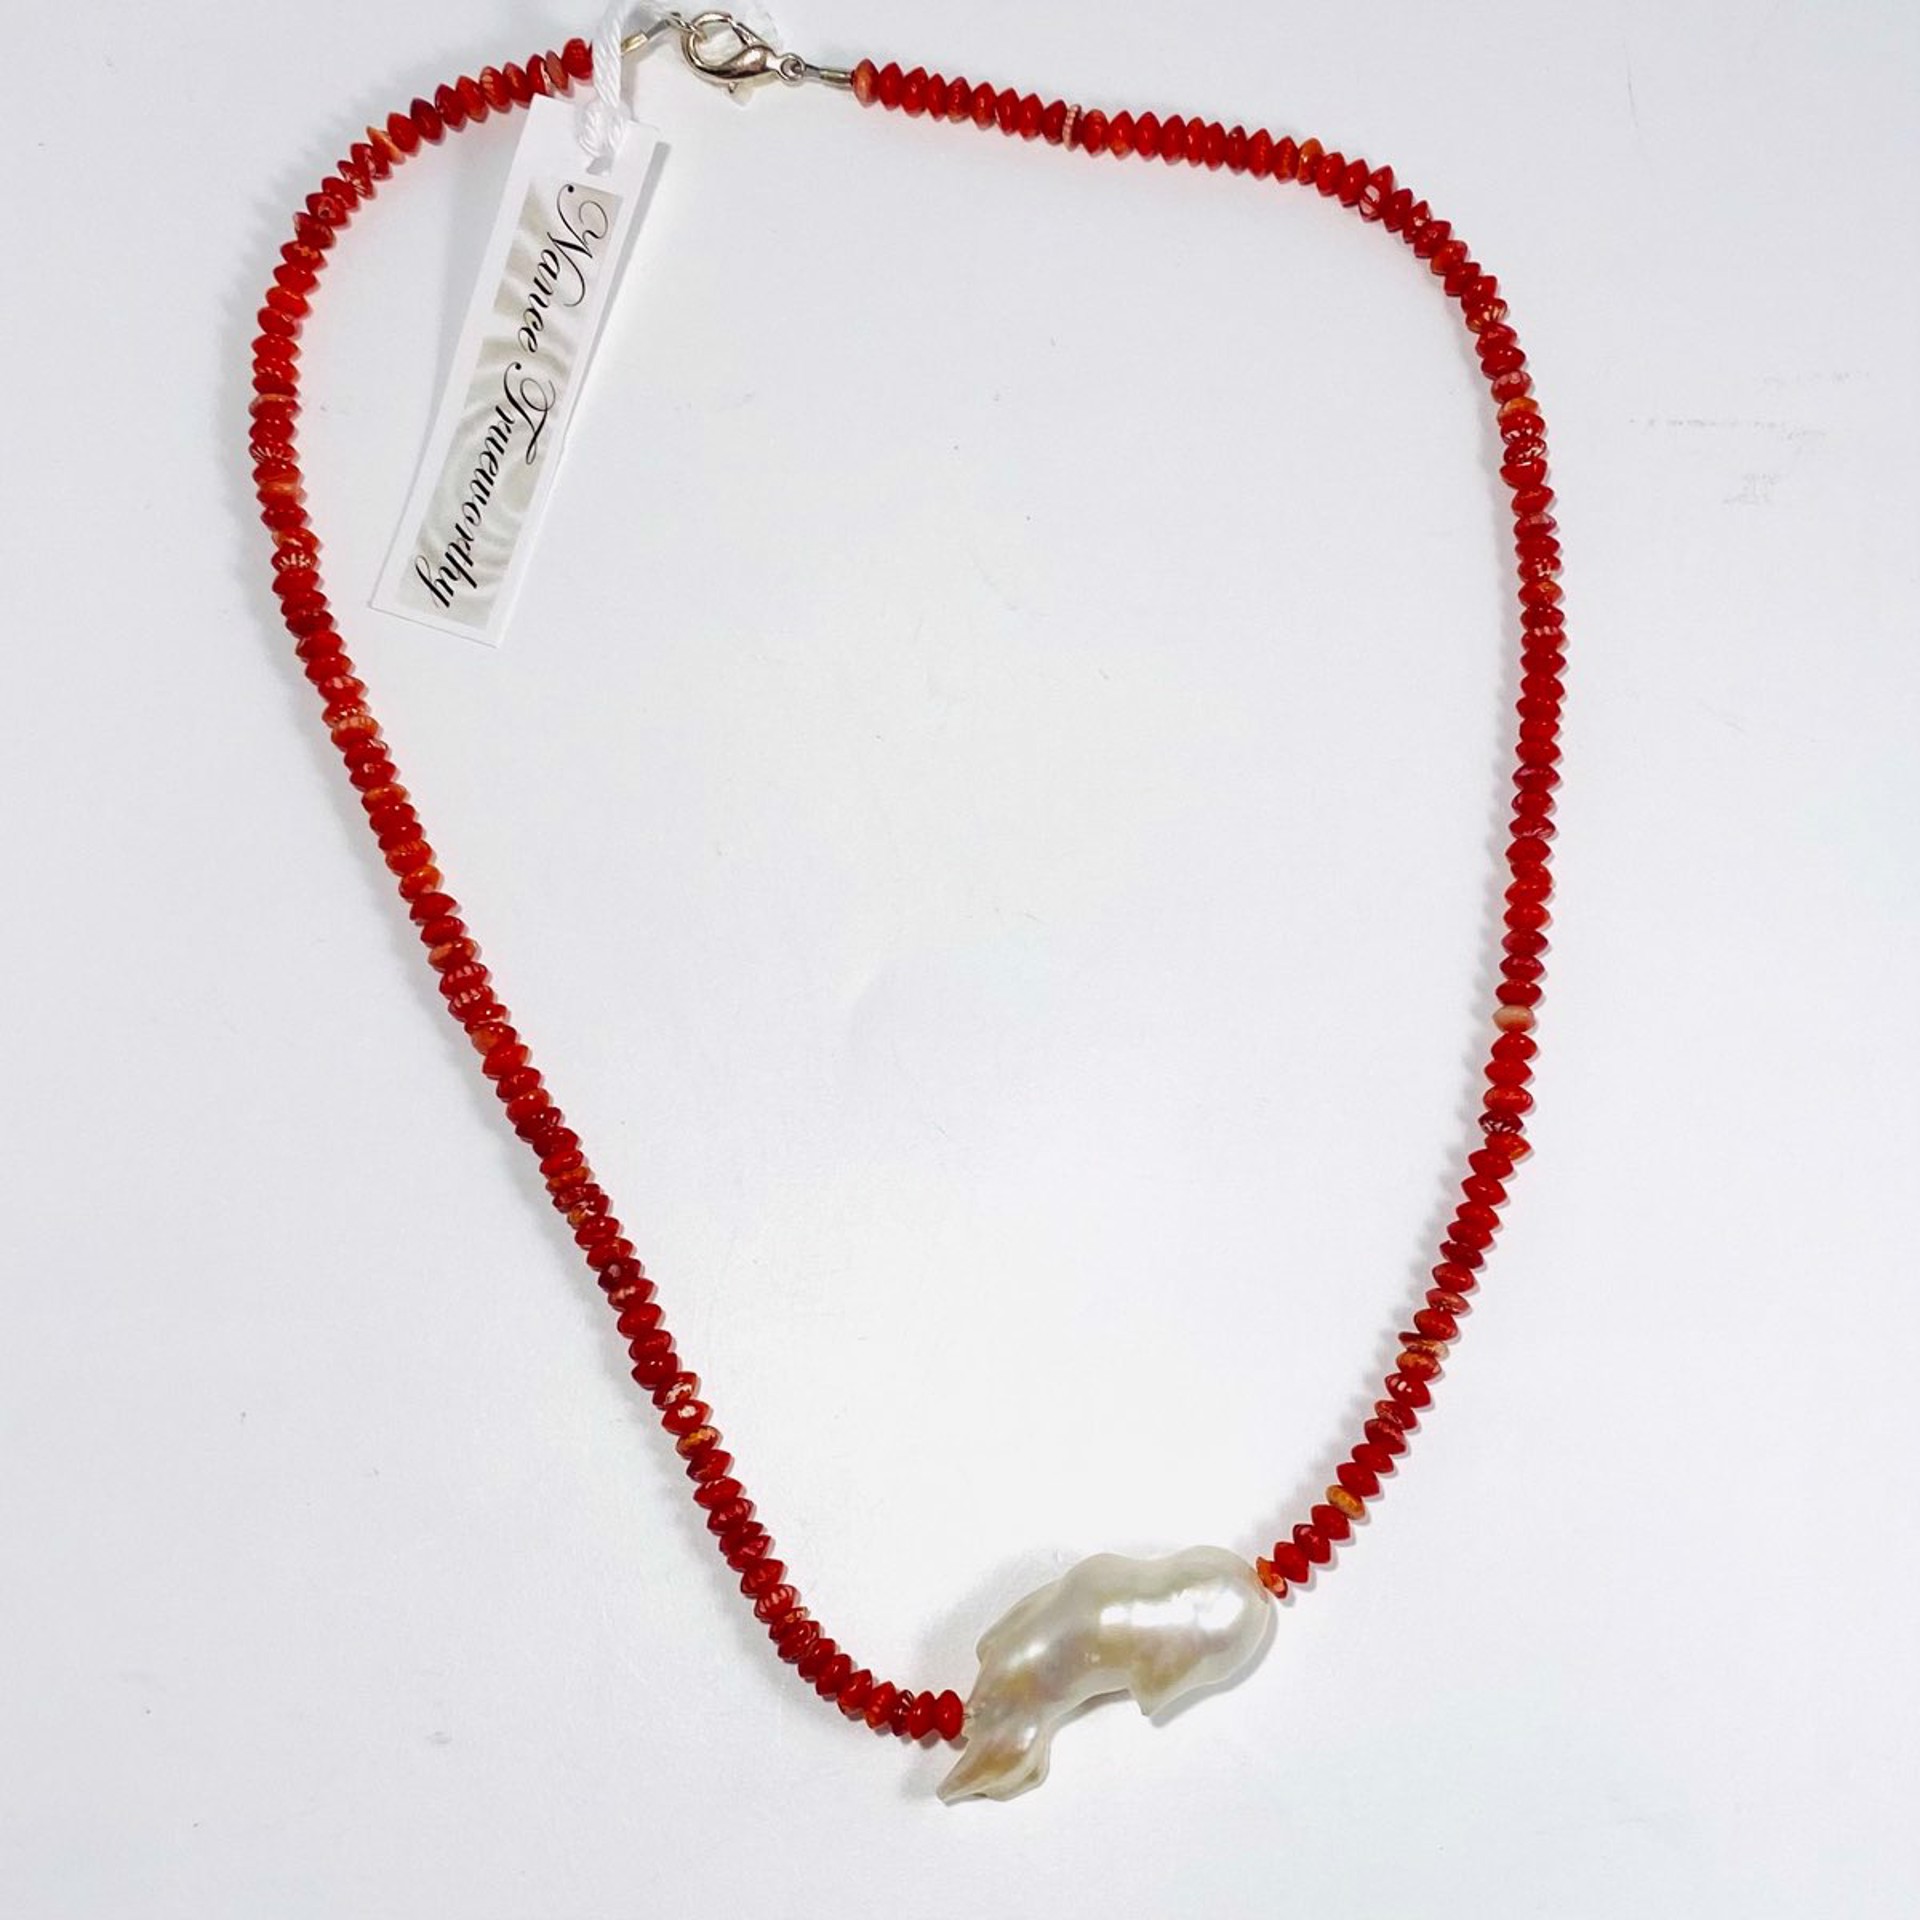 NT22-93 Large Baroque Pearl Focal Red Coral Necklace by Nance Trueworthy